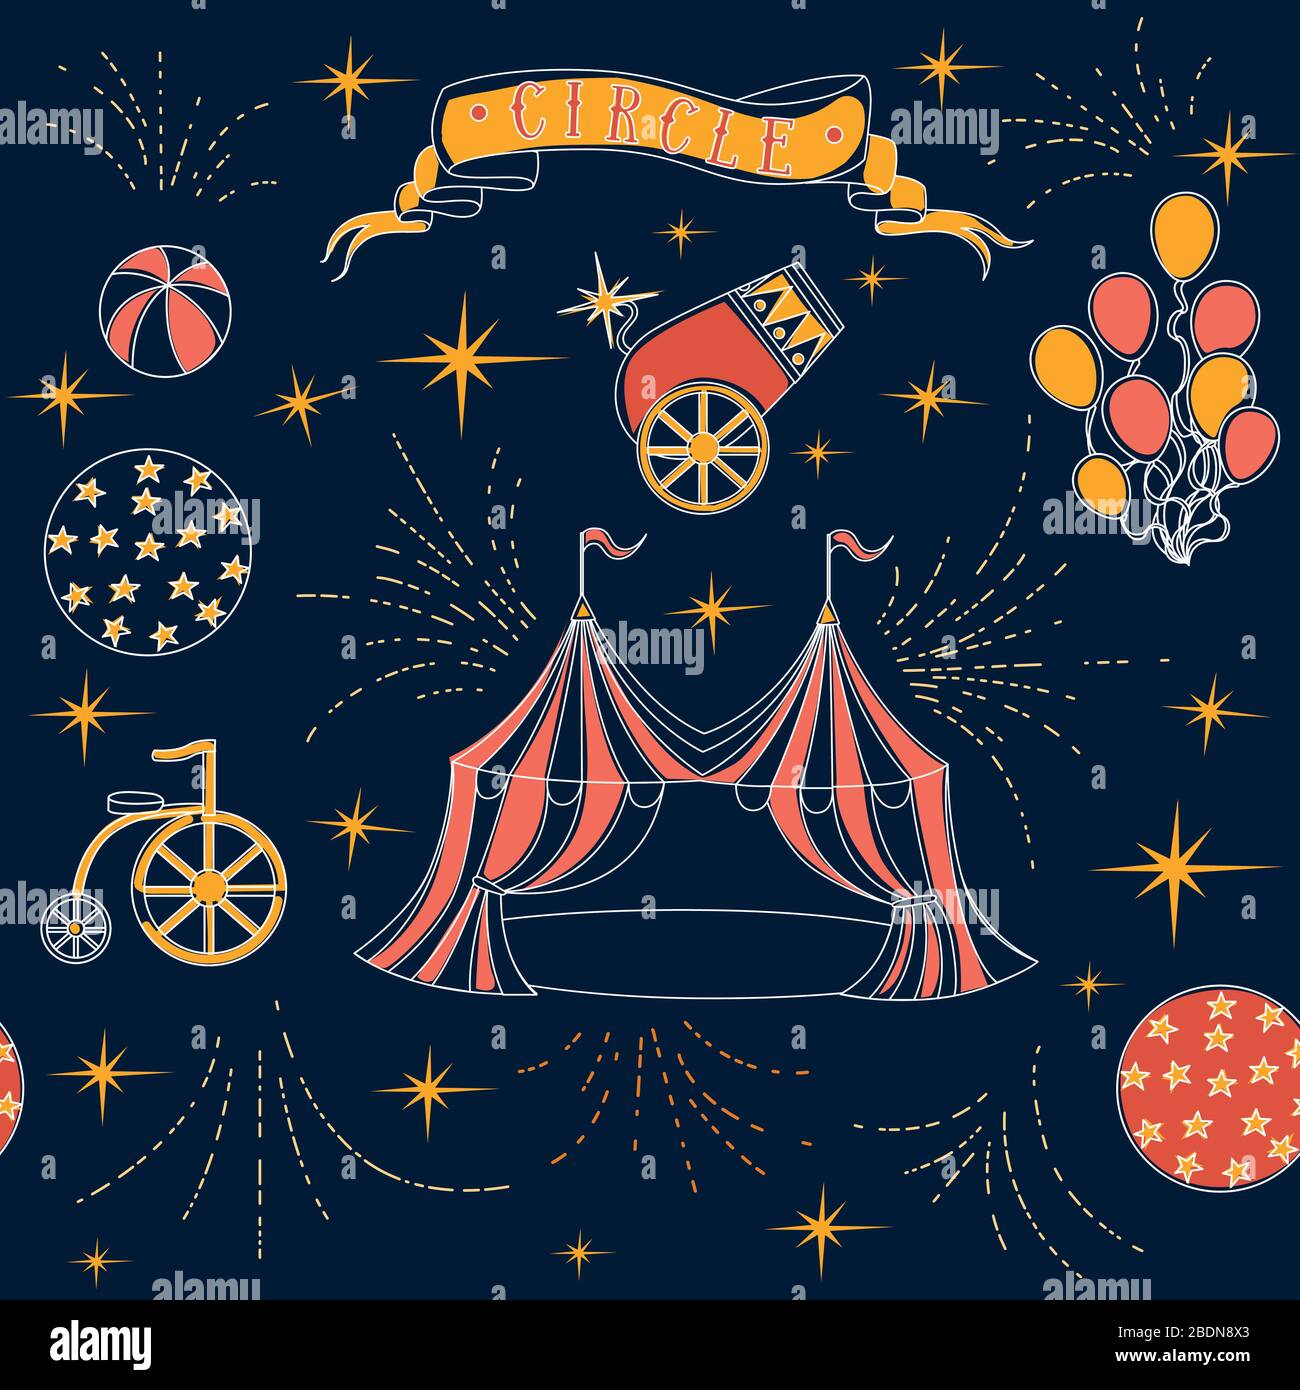 Seamless pattern outline circus icons collection linear style flat vector illustration on dark background Stock Vector